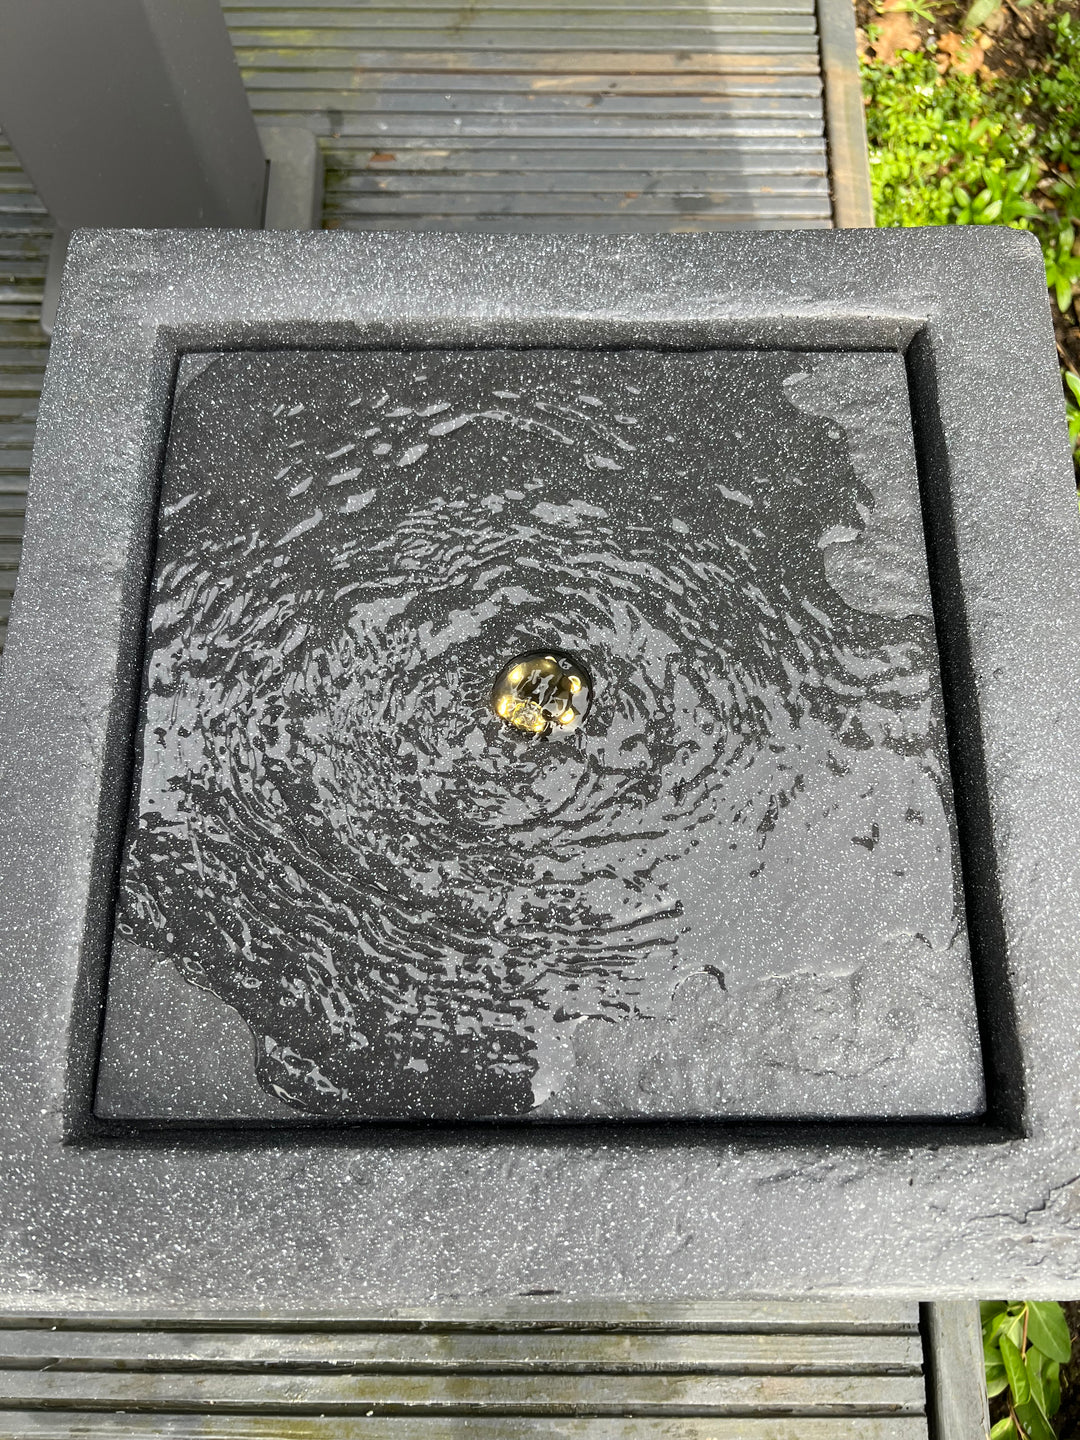 Square Water Feature with LED Lights - Solar - Dark Grey 37x37x30cm